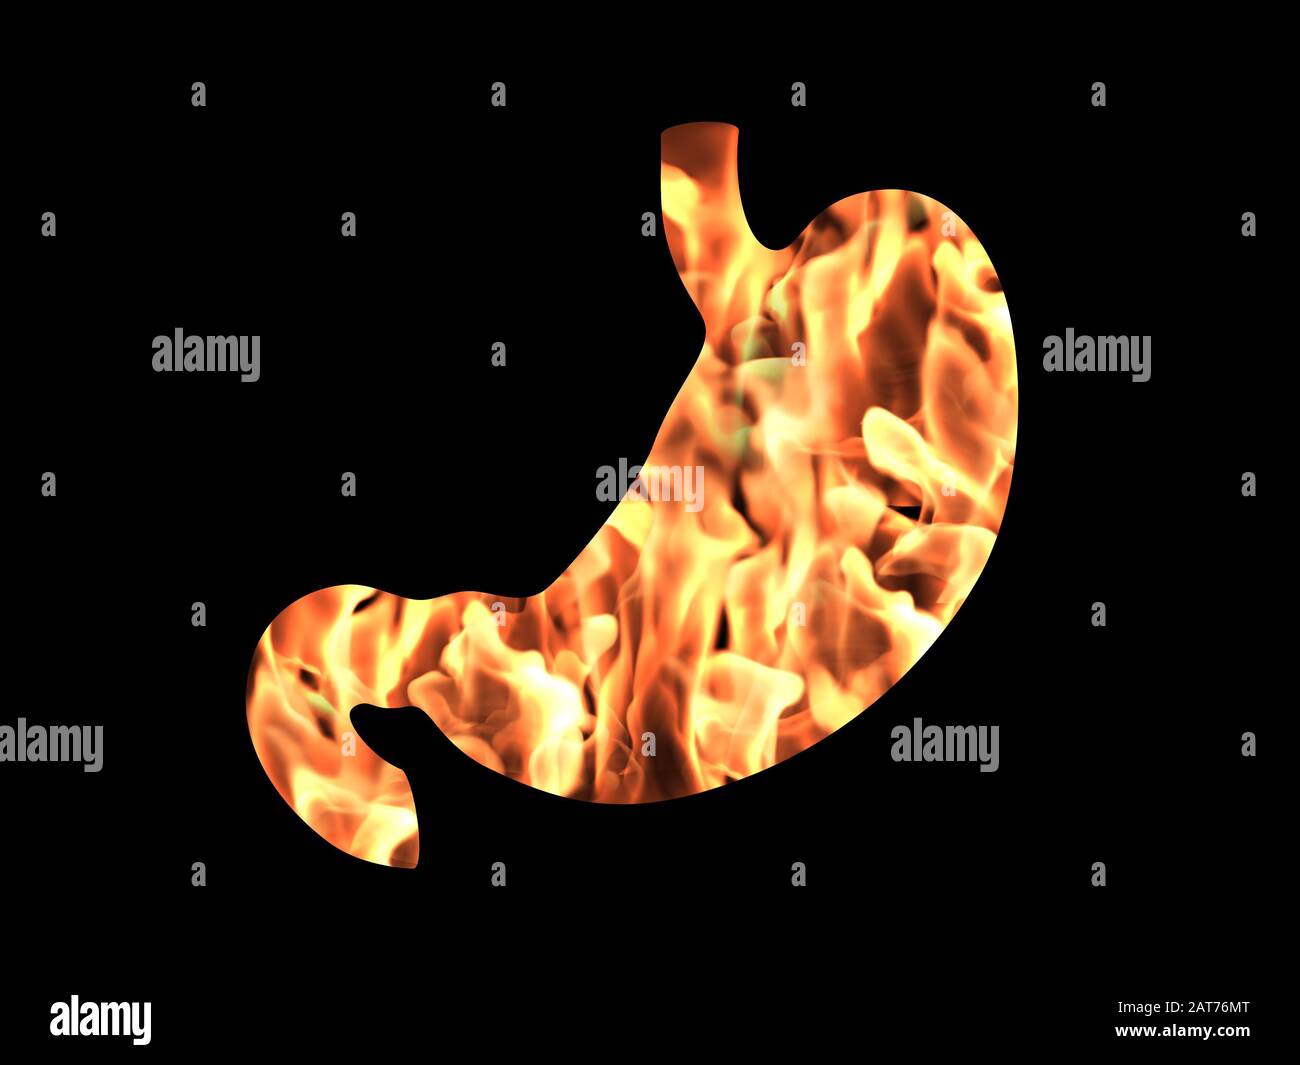 An abstract illustration of human stomach with heartburn disease Stock Photo